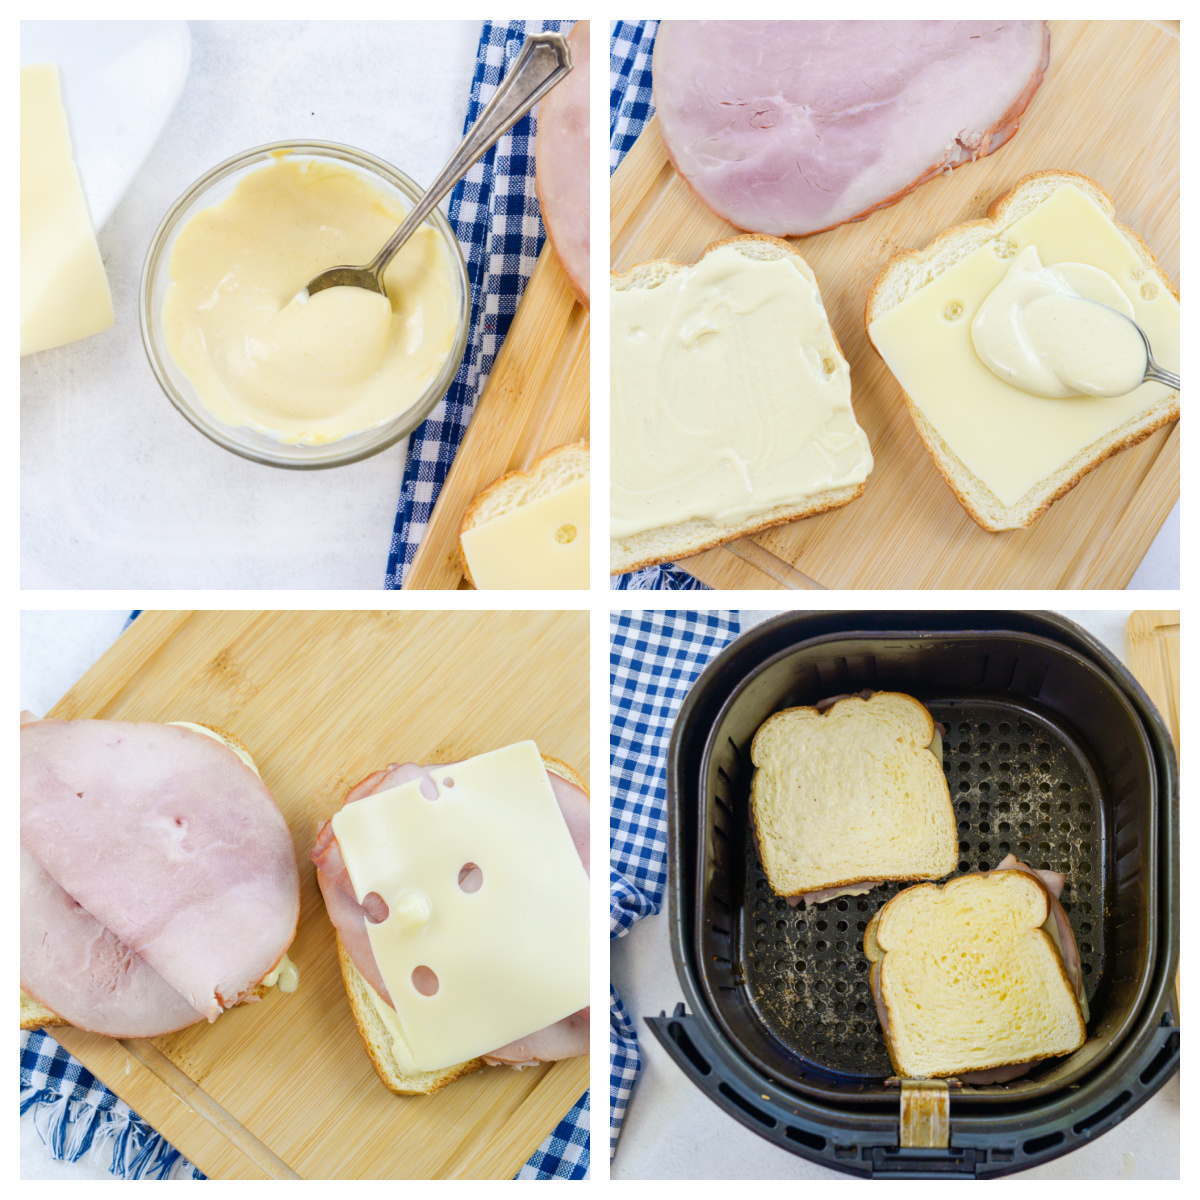 Collage of the steps of making ham and cheese sandwiches.